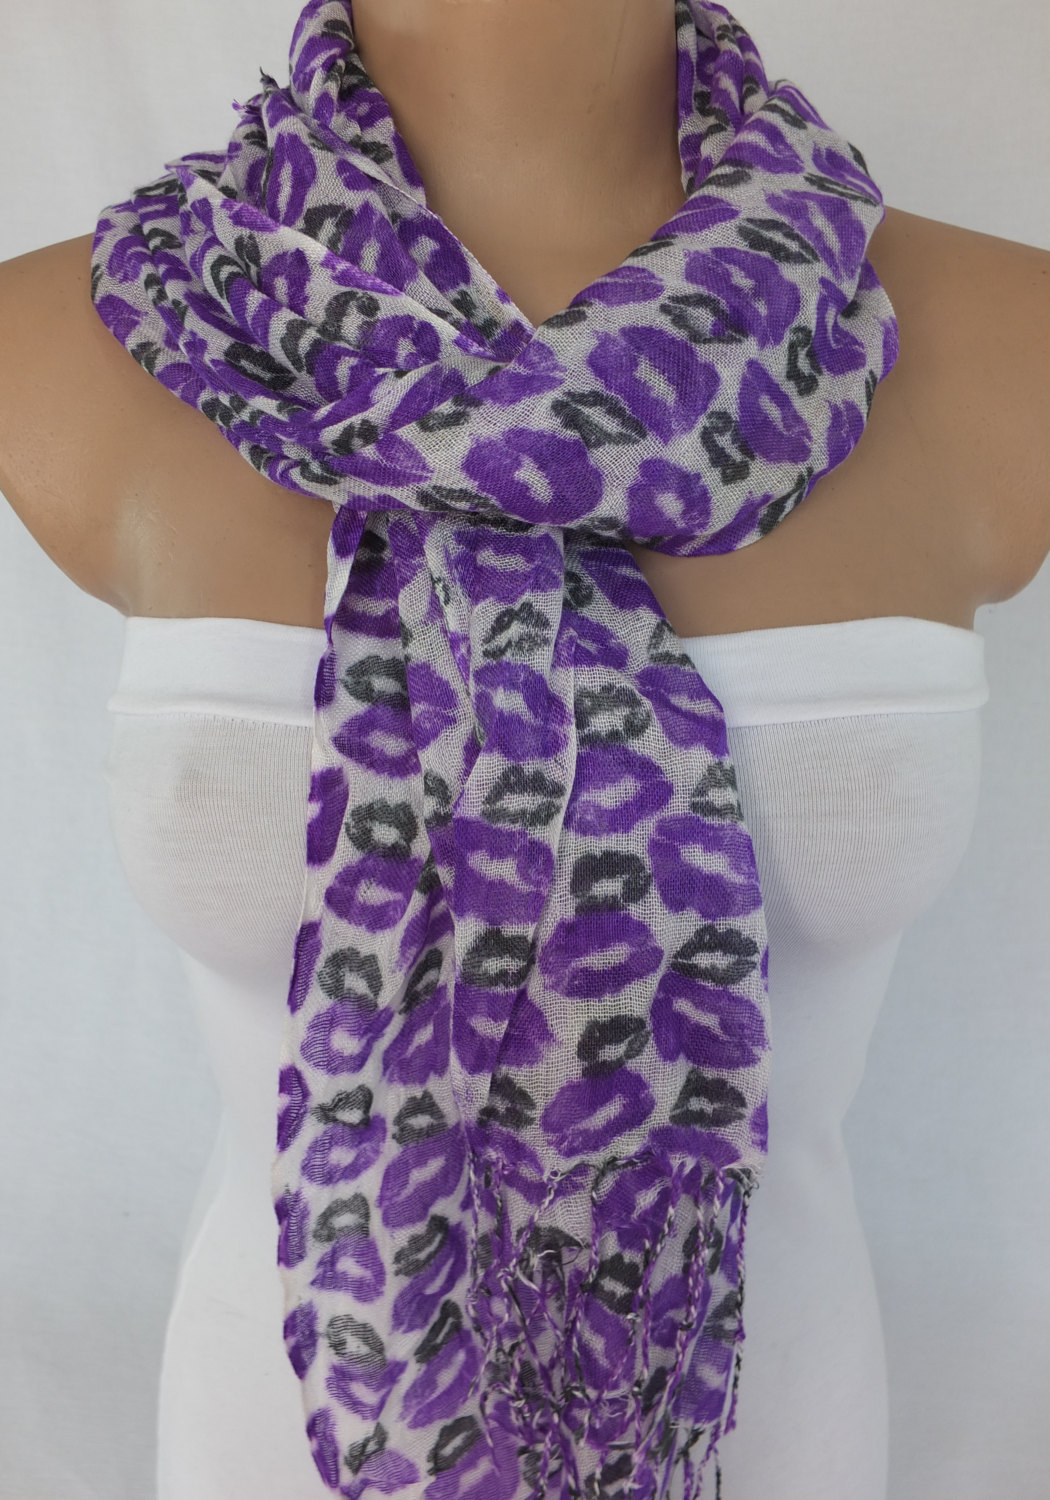 Purple scarf, lips printed scarf, long scarf woman fashion scarf, colorful scarf, fabric shawl, gift for her